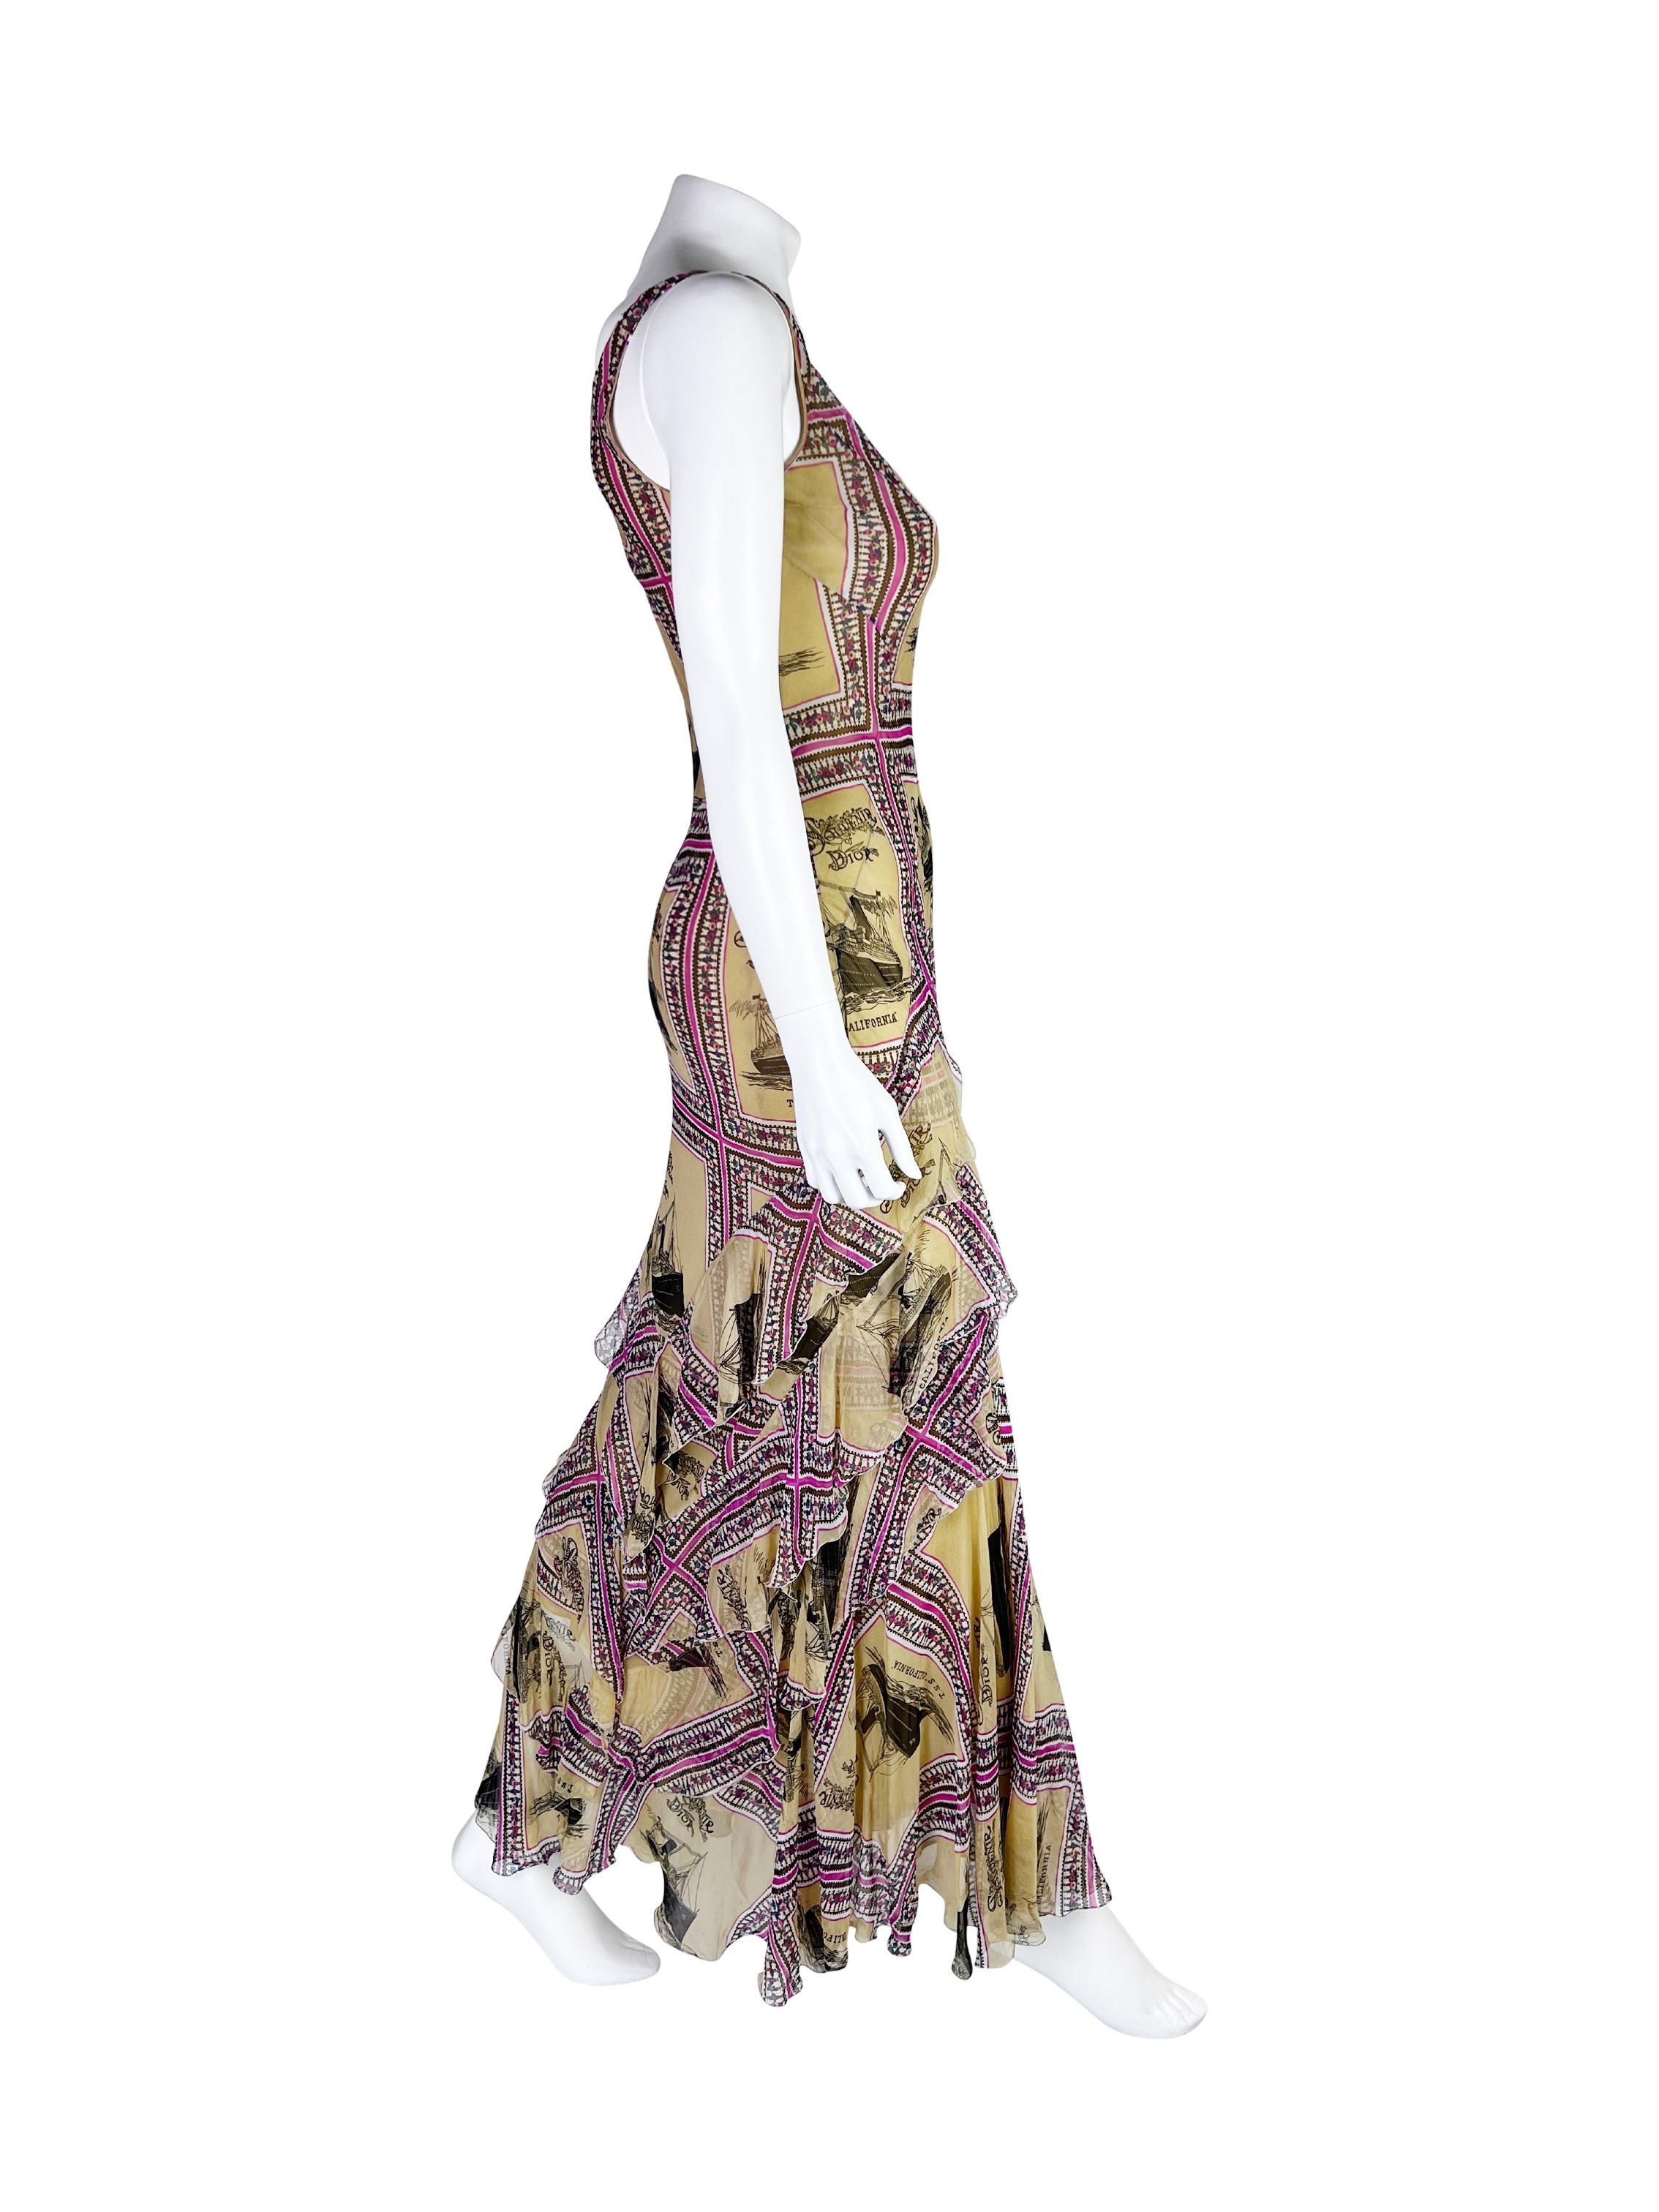 Dior by John Galliano Spring 2002 RTW Printed Silk Gown 1